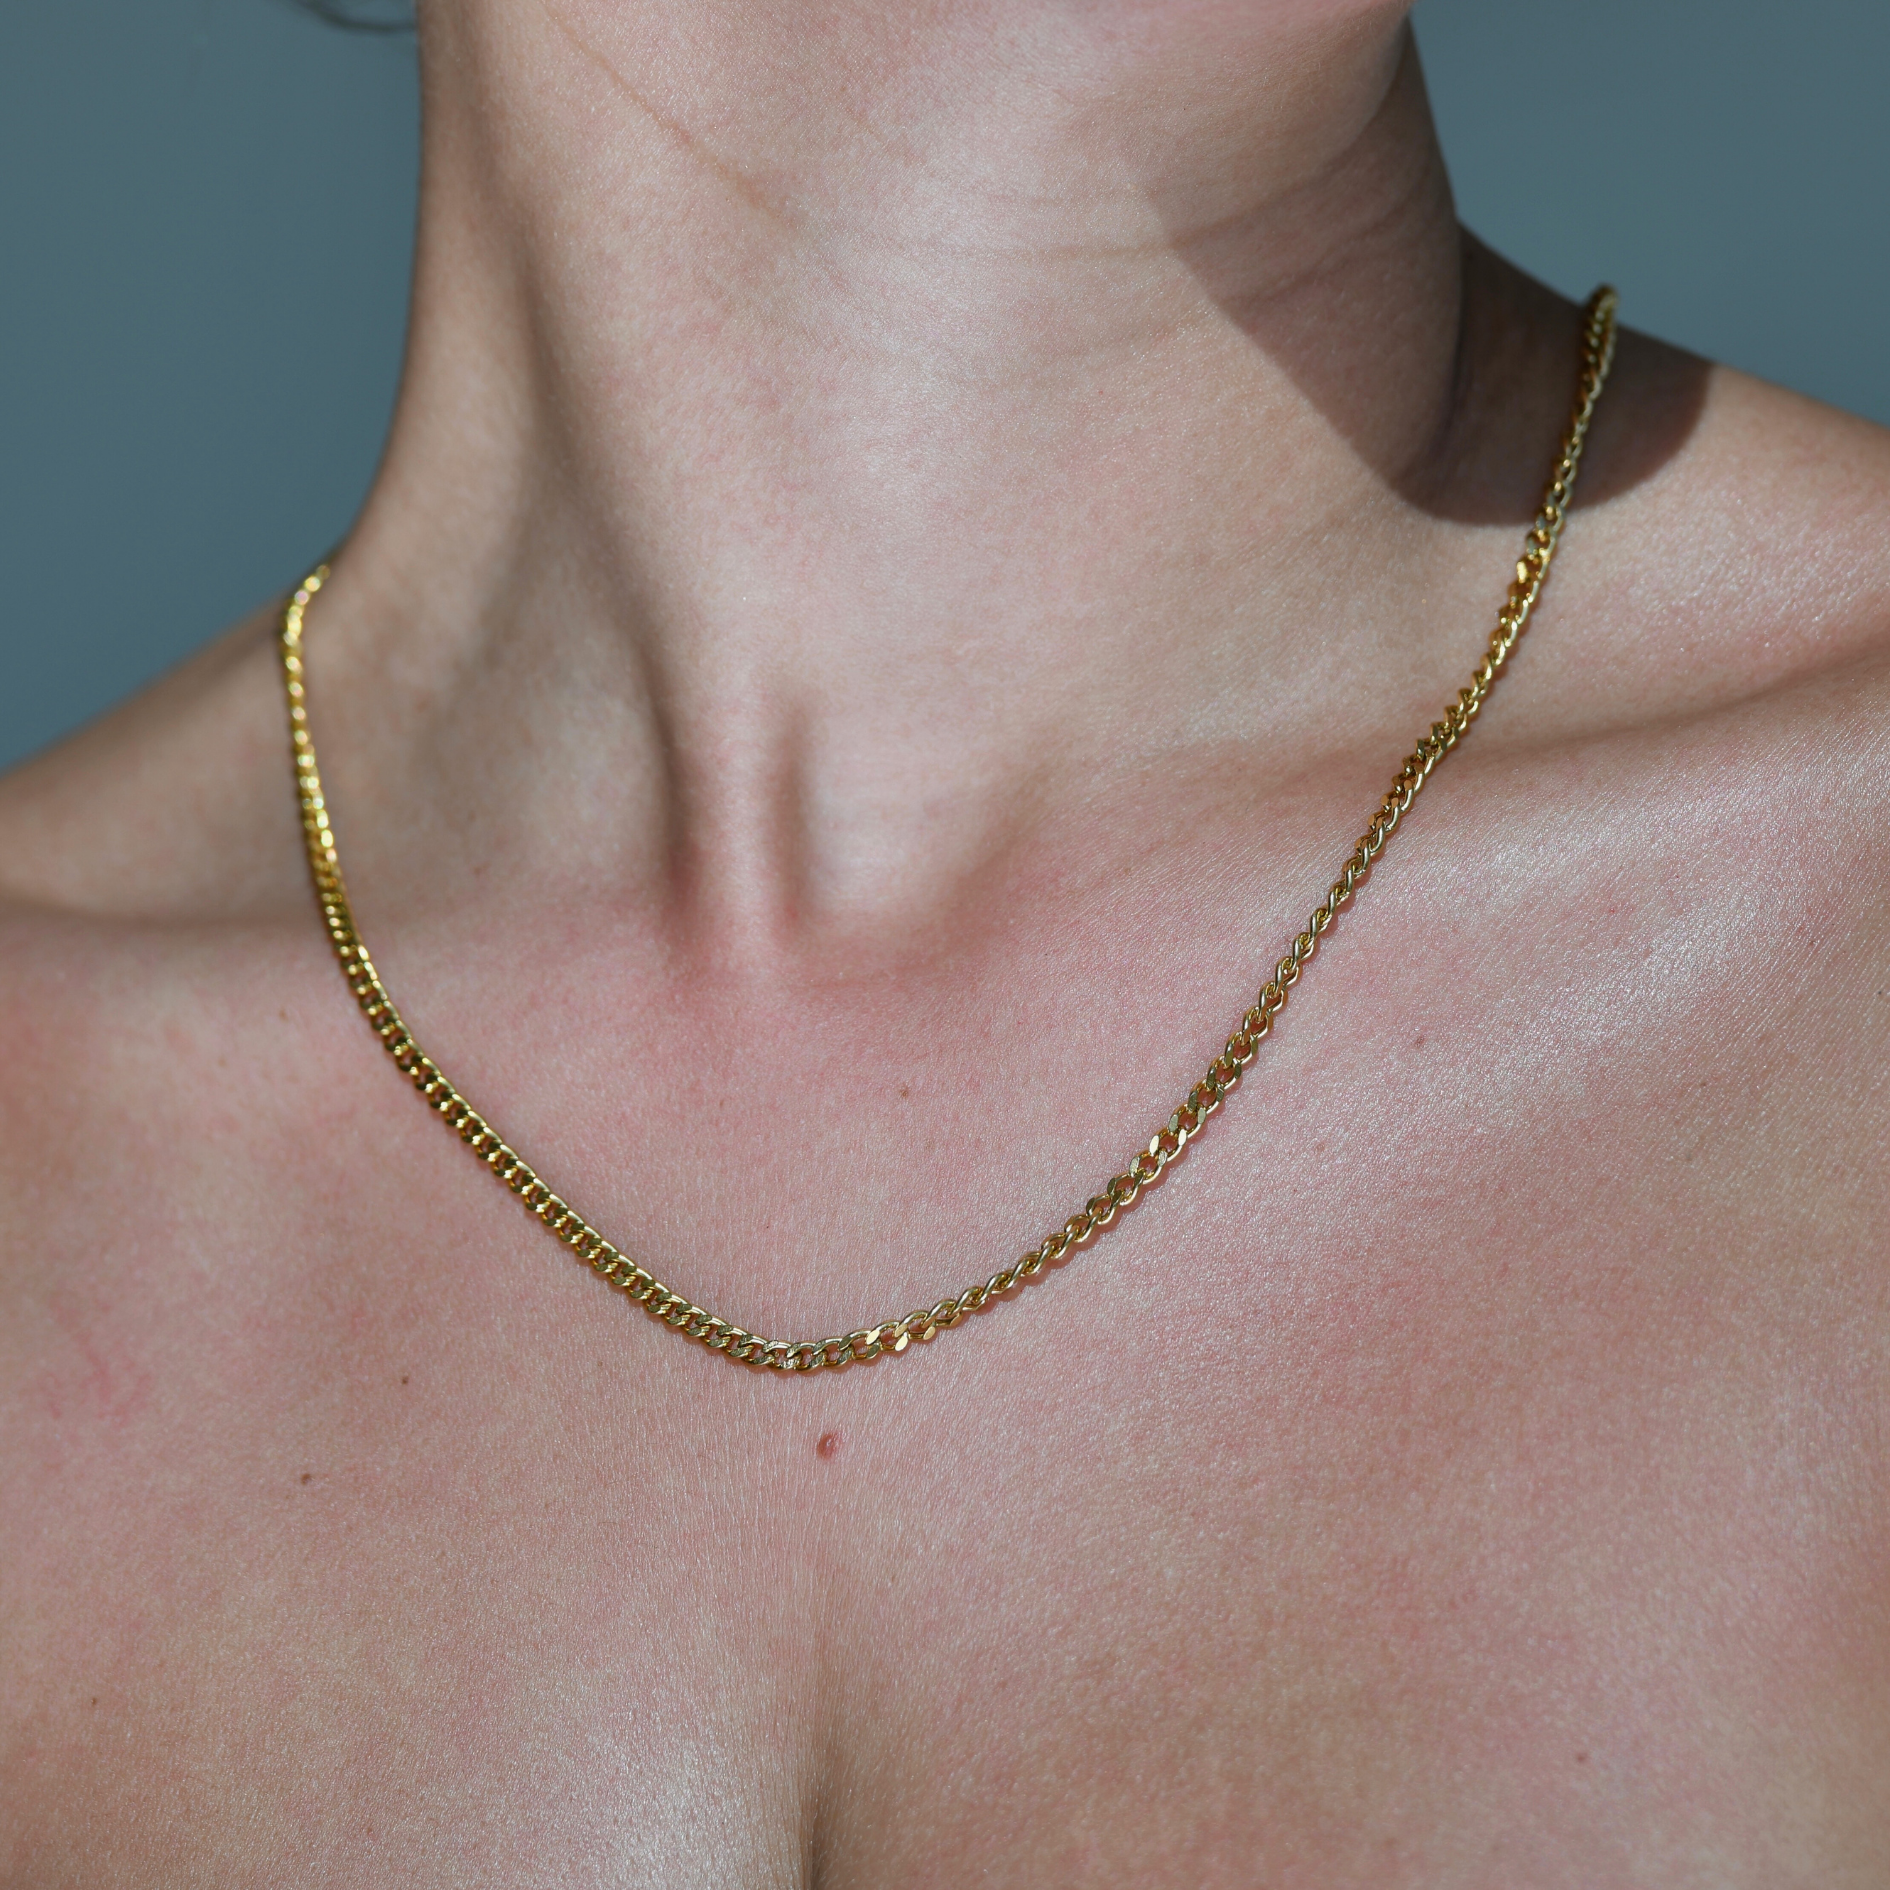 CUBAN three milimeter width gold chain. CUBAN S Gold Chain Necklace